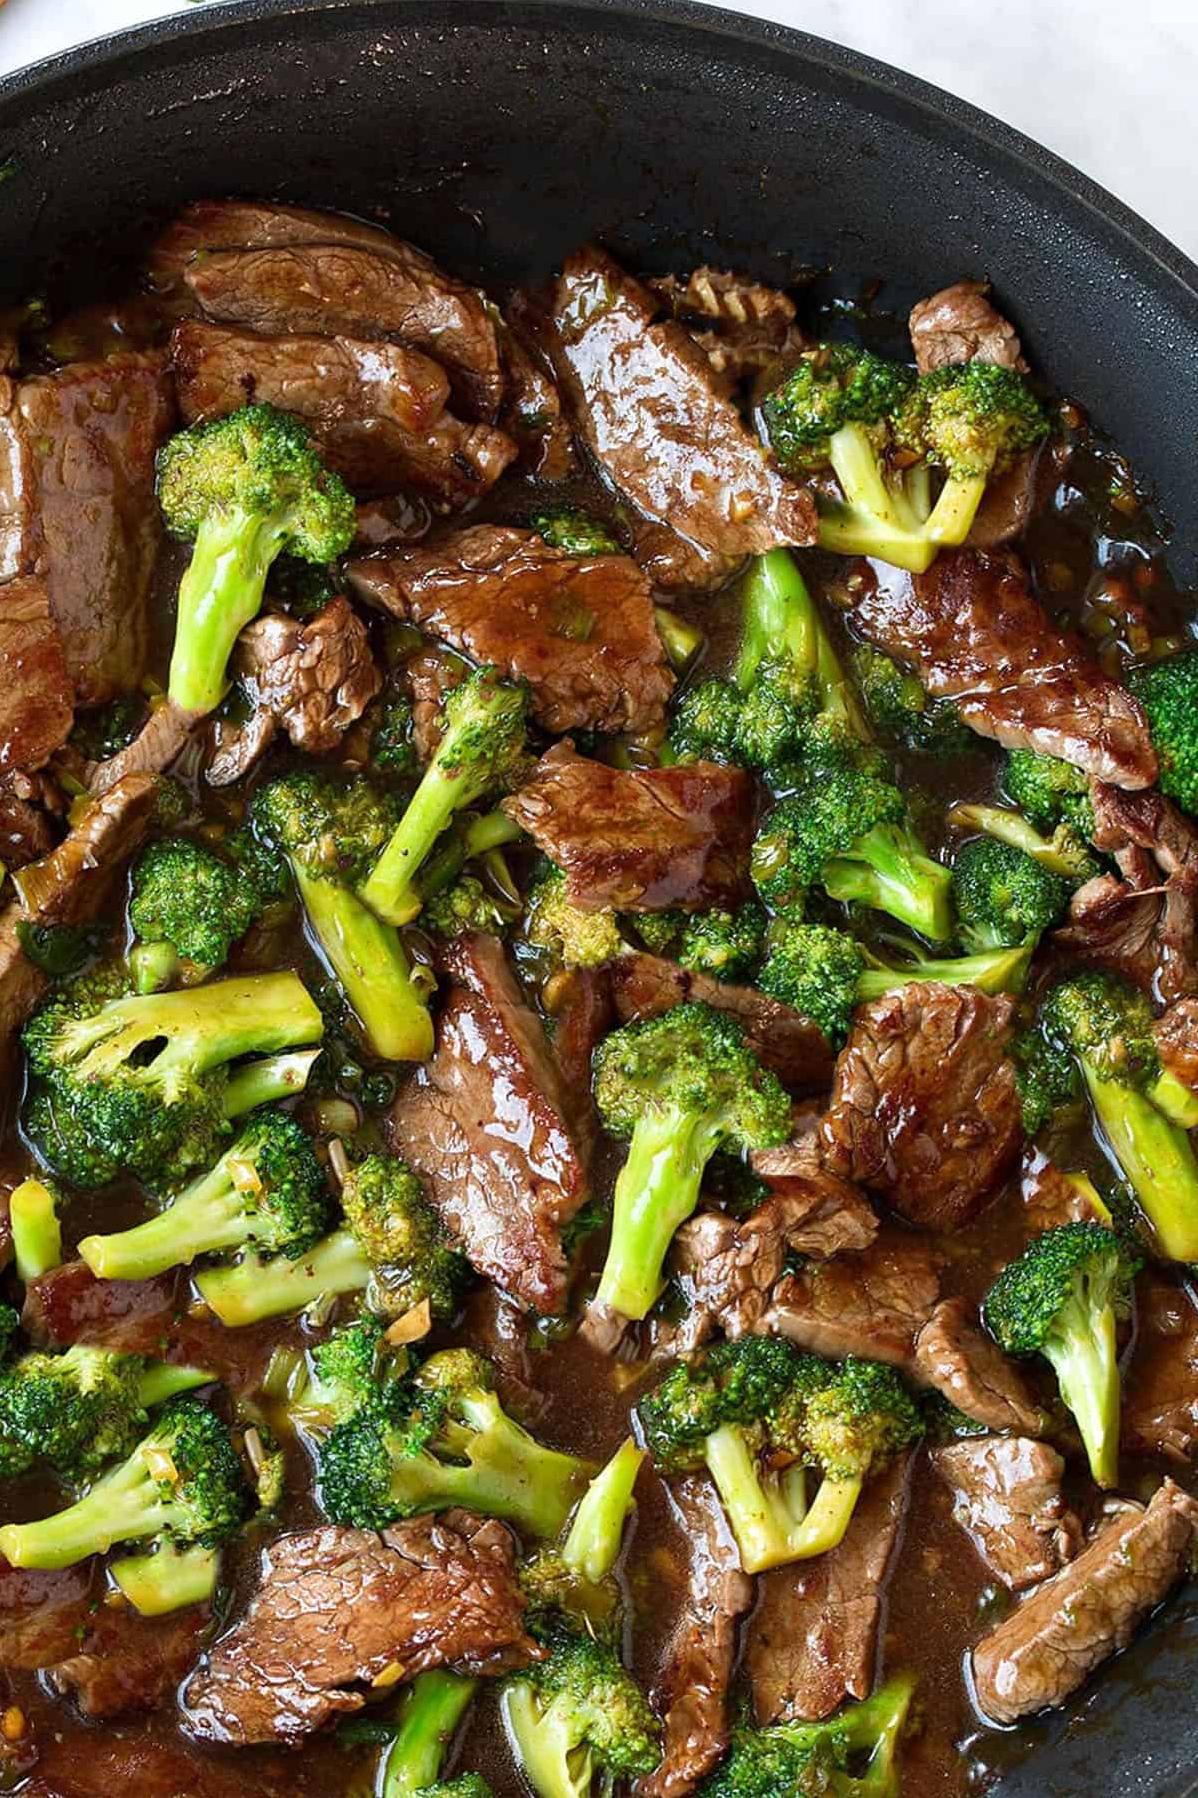  A plate of perfectly seared beef strips alongside fresh broccoli and a flavorful wine sauce.